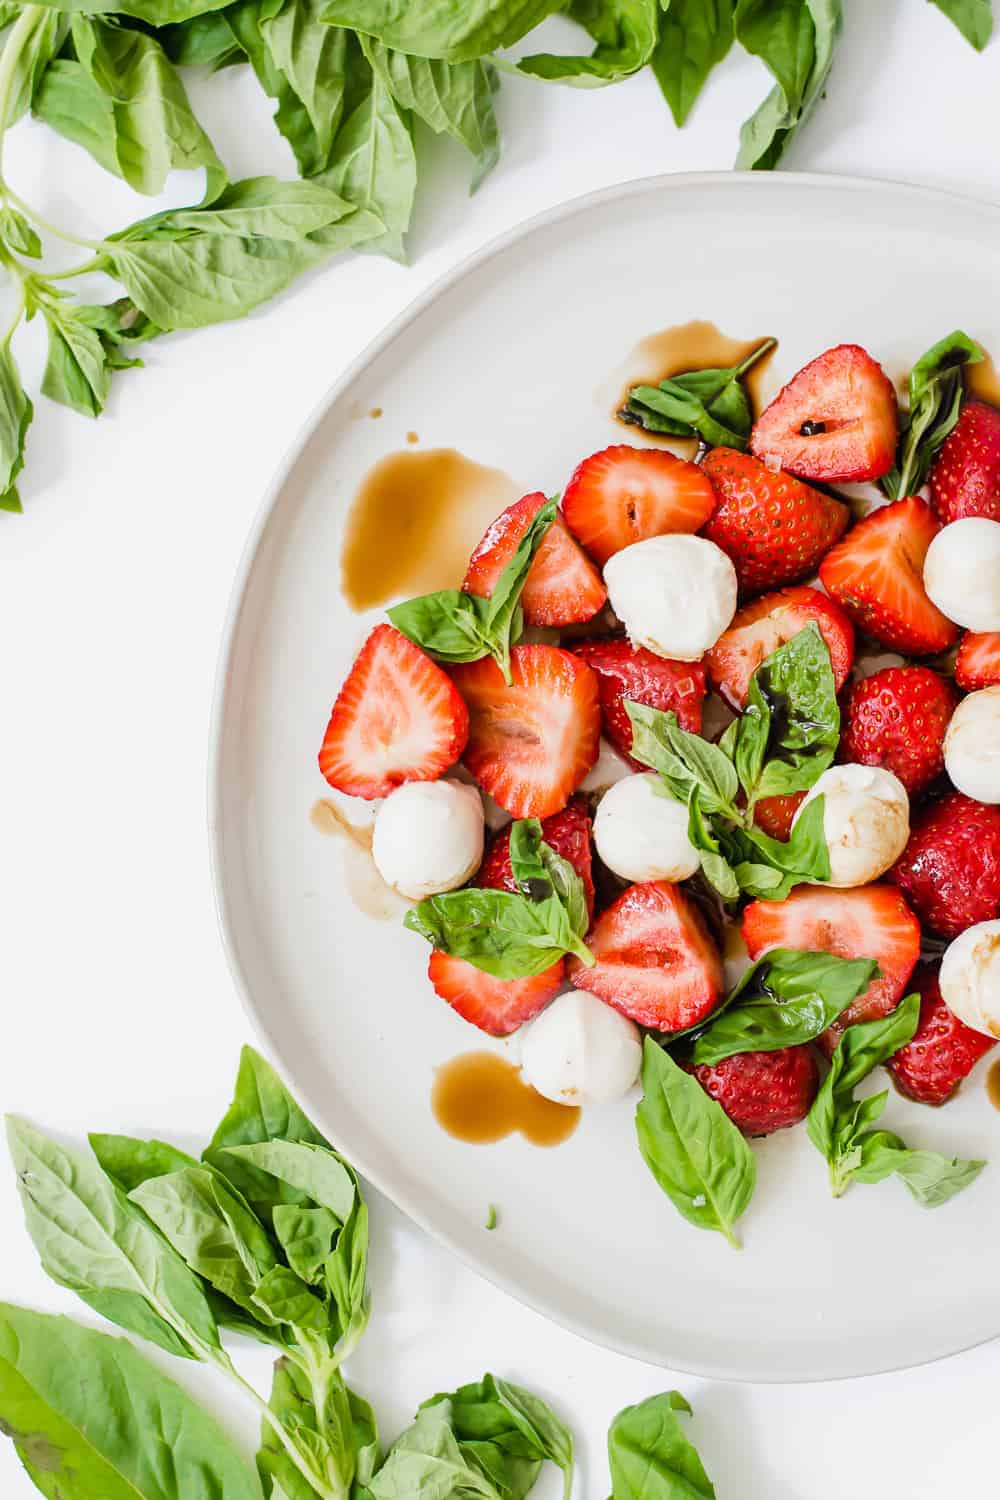 Overhead shot of halve strawberries on white plate with basil leaves and mozzarella balls.